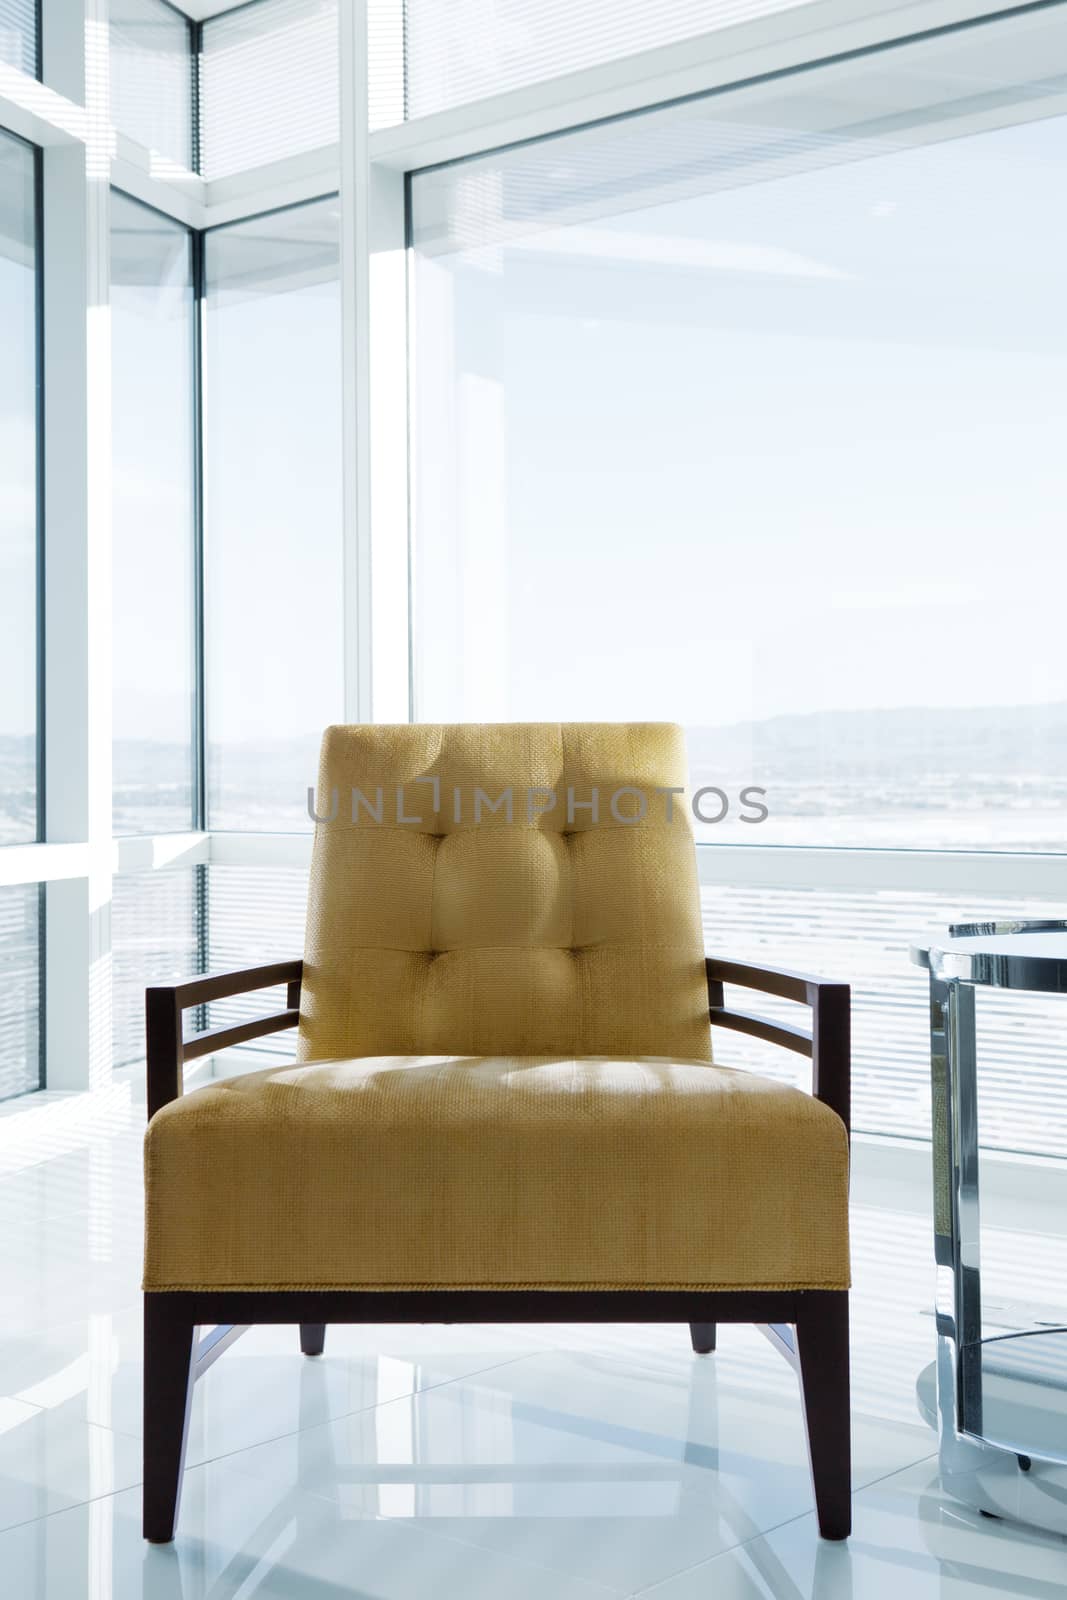 close up view of modern chair in office environment